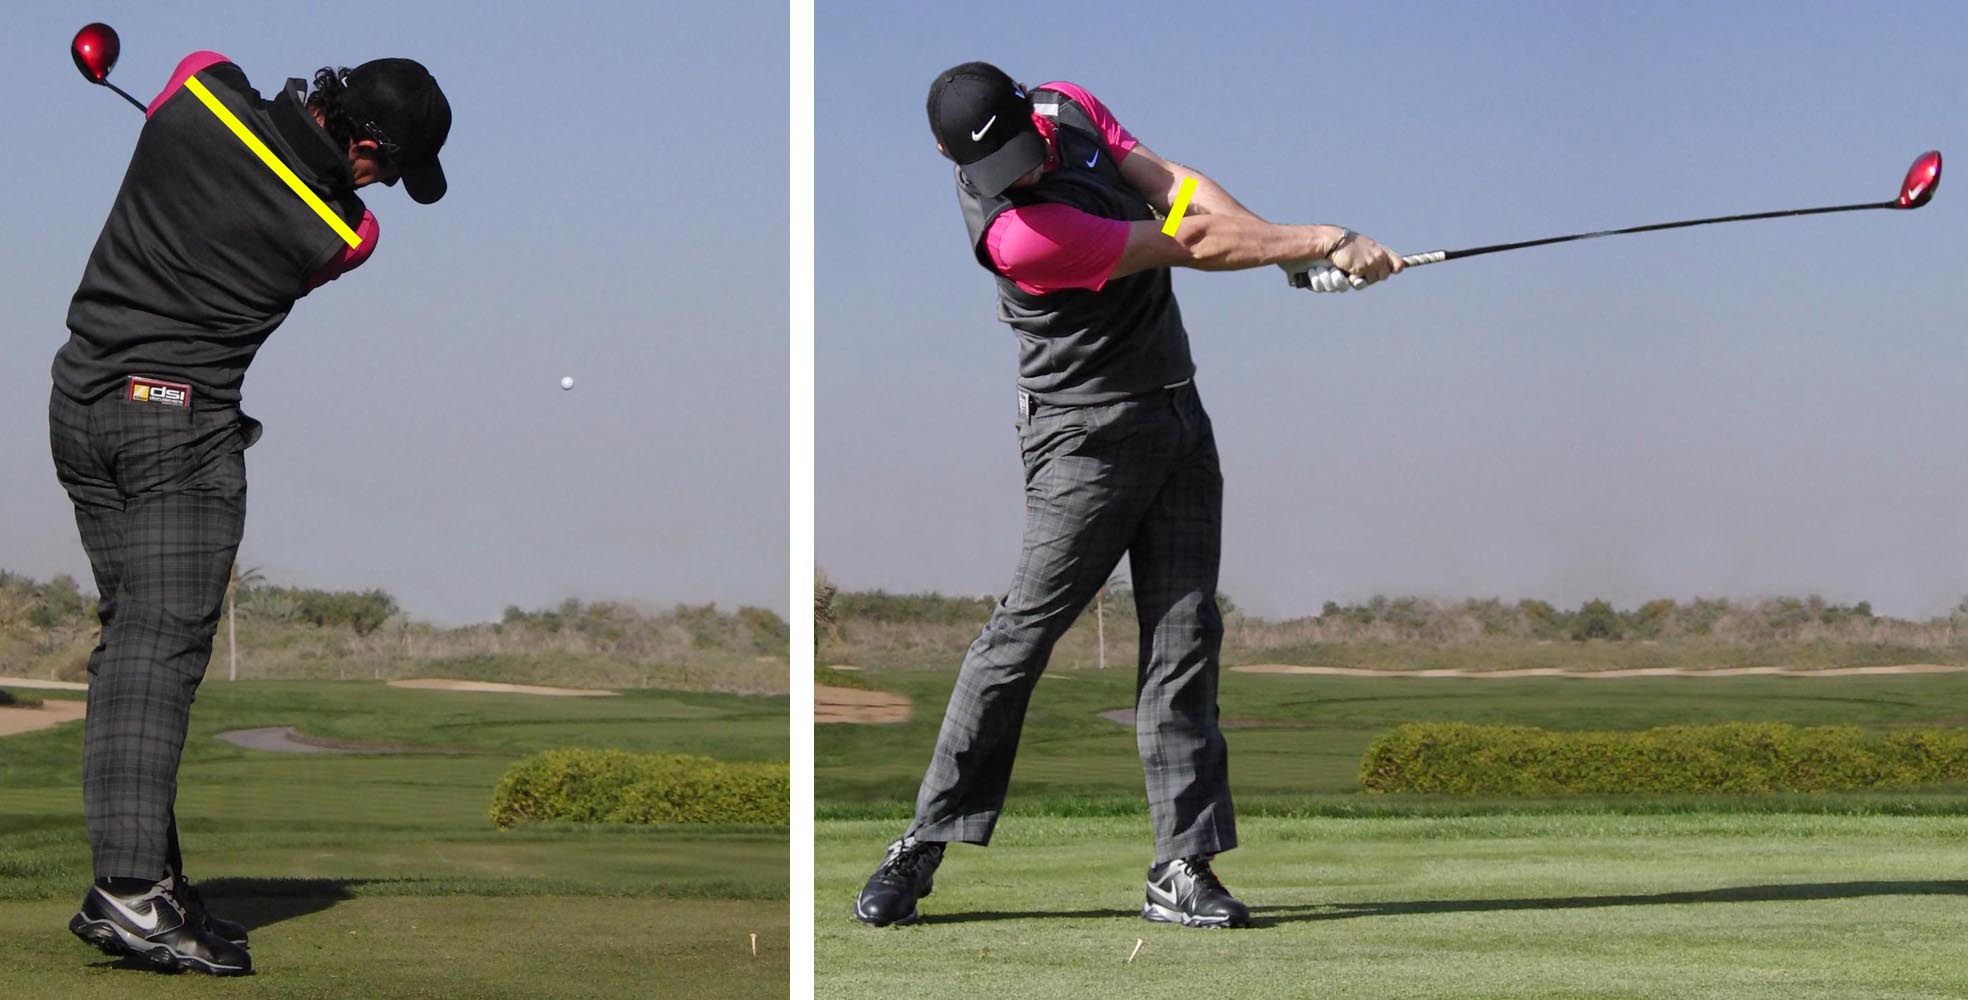 90 degree shoulder turn from impact while elbows are almost touching on the exit